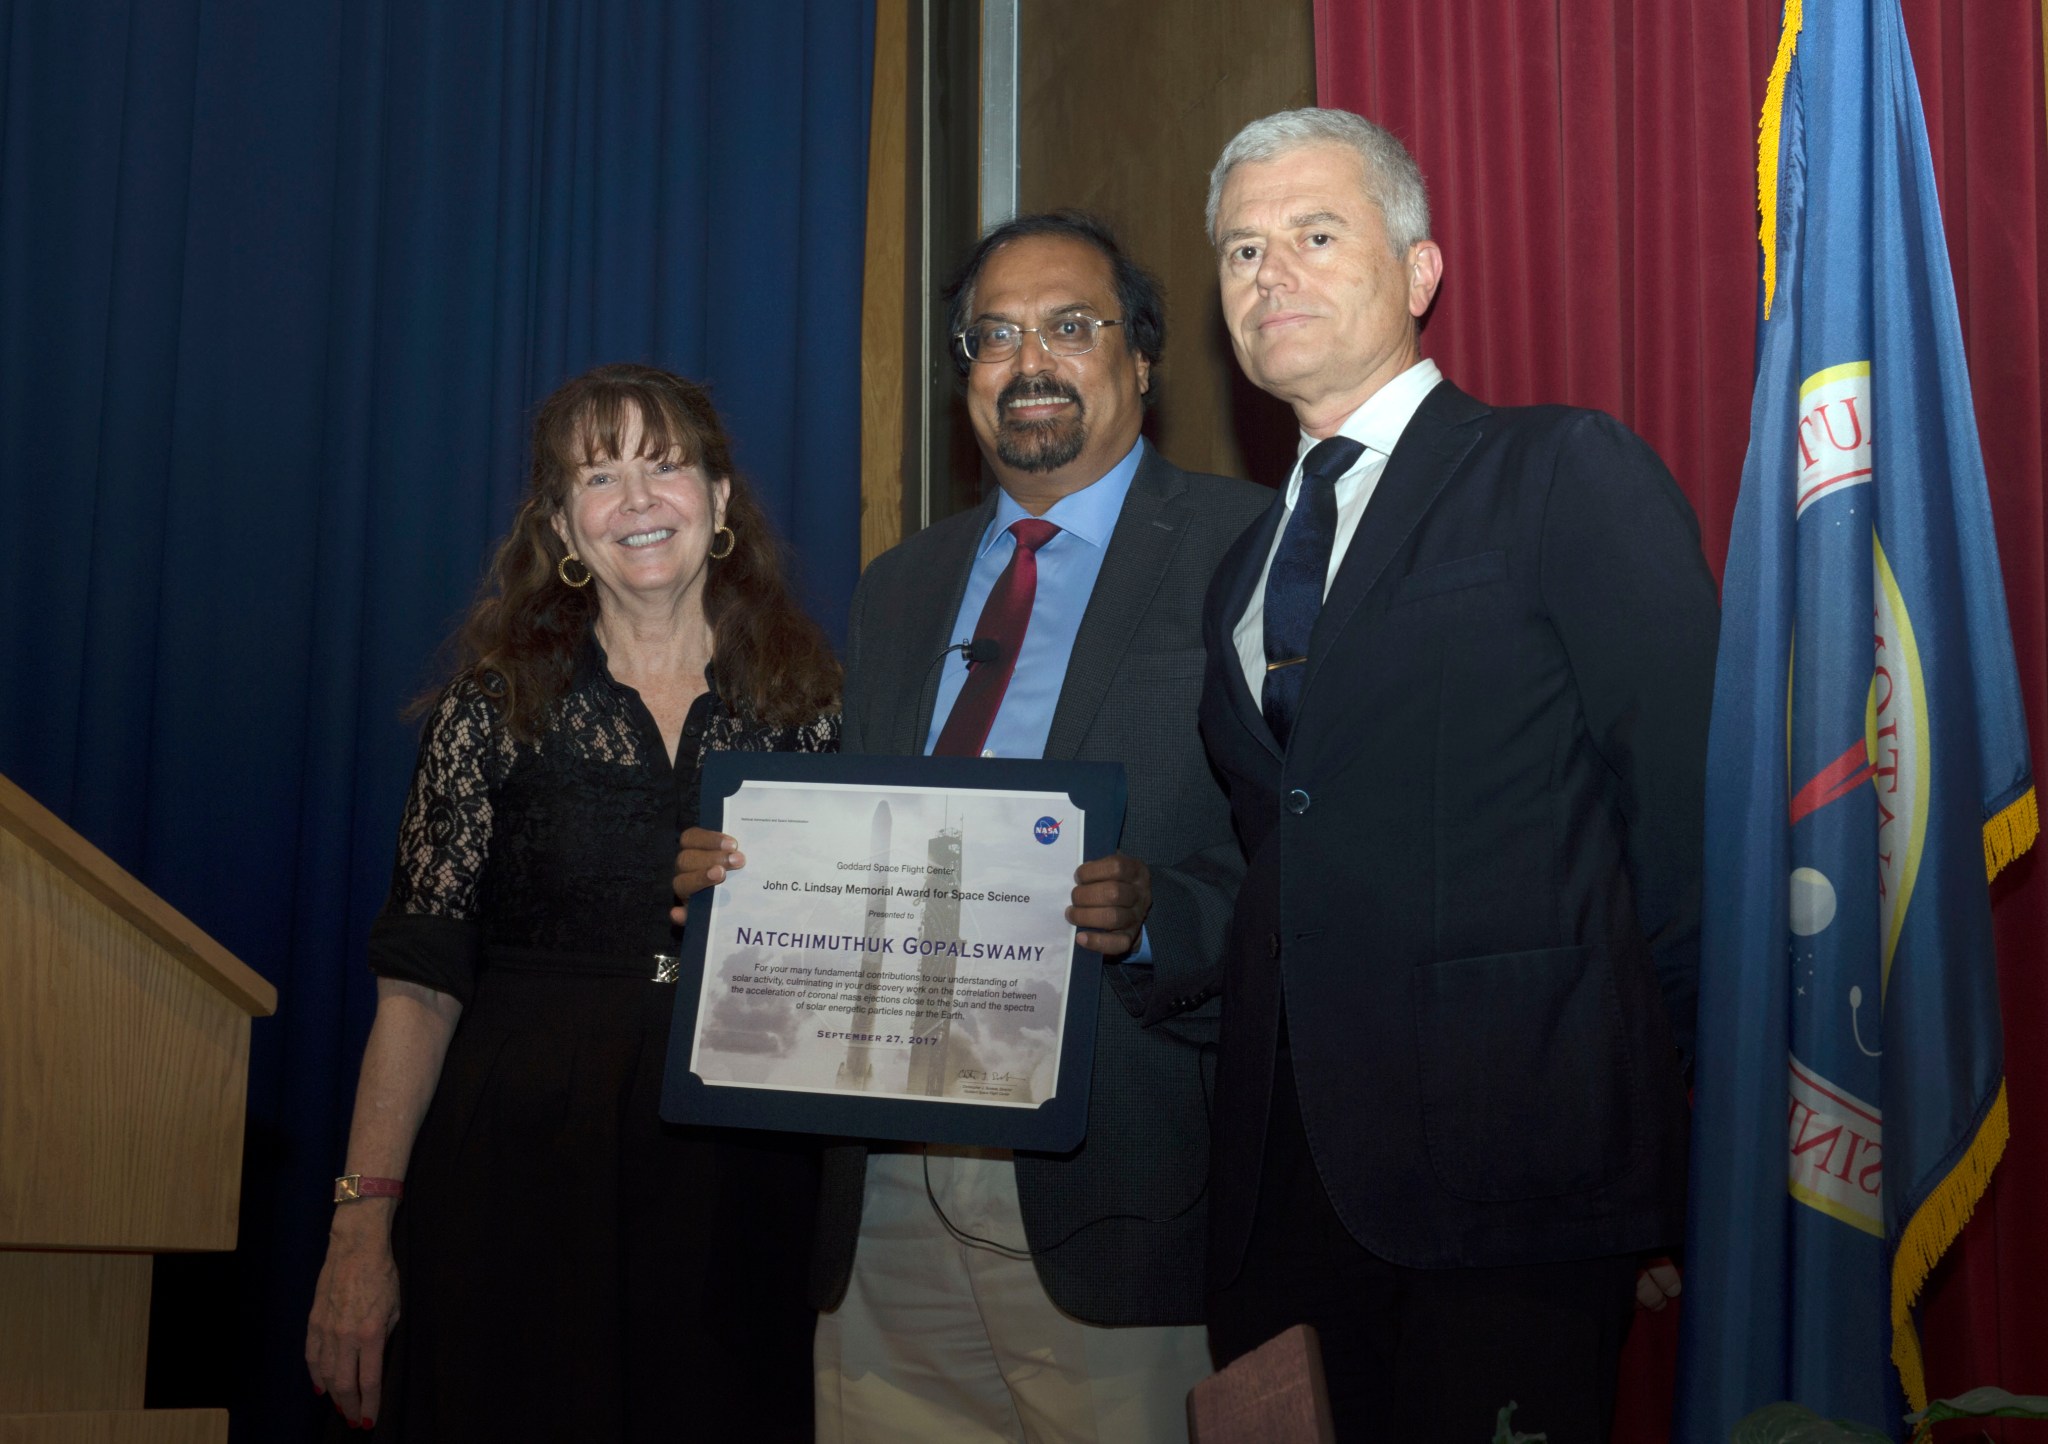 (l to r) Dr. Colleen Hartman, Dr. Natchimuthuk Gopalswamy, Dr. Mark Clampin